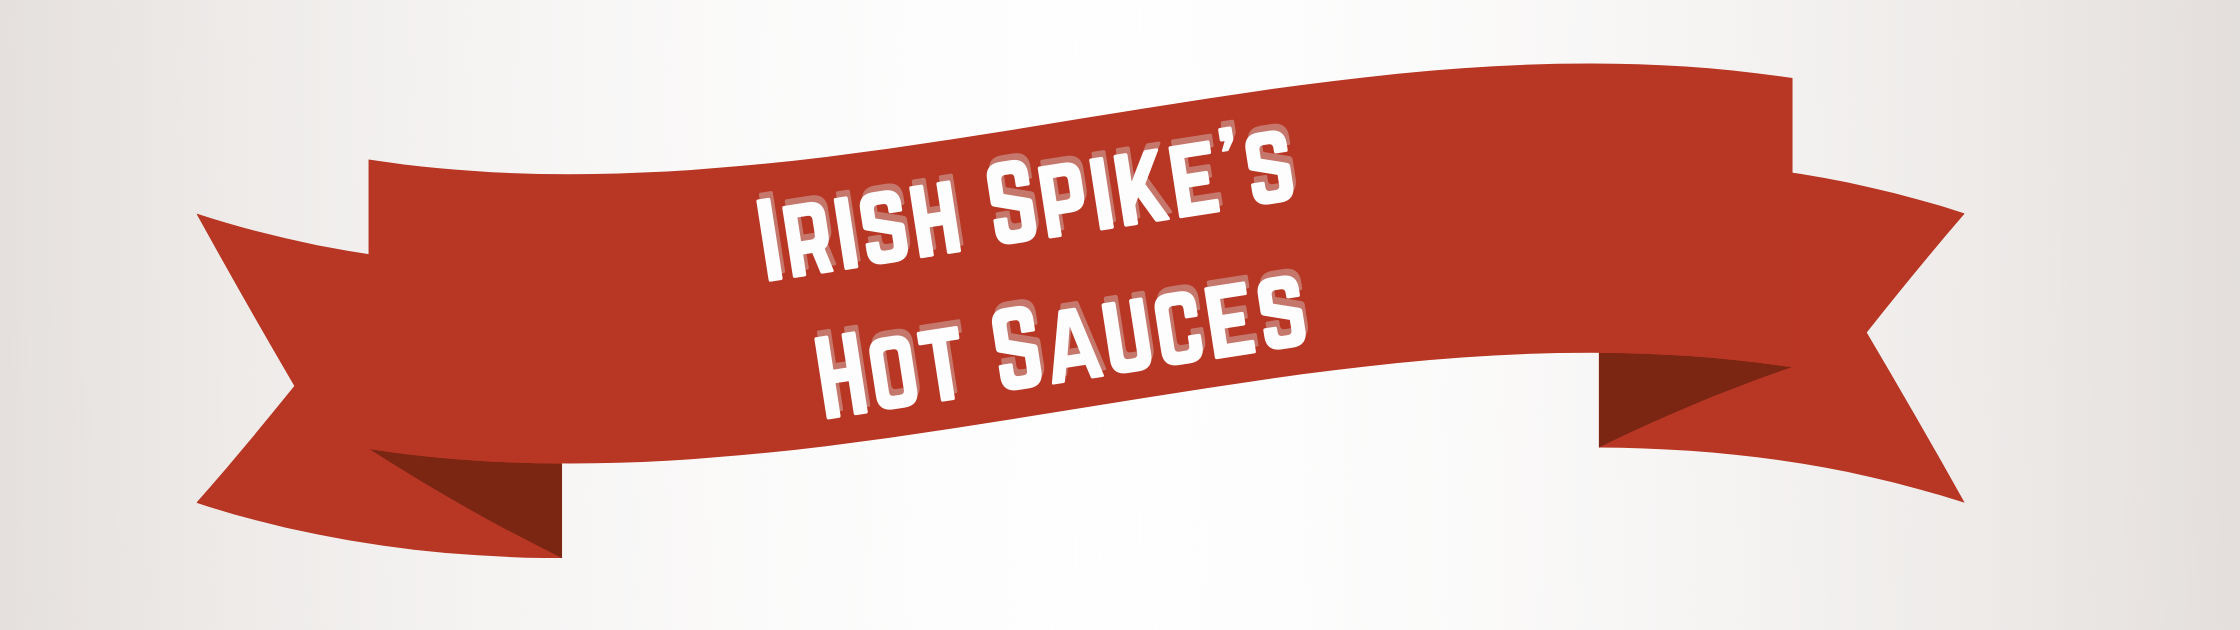 Irish Spike's Hot Sauces on a red holiday banner